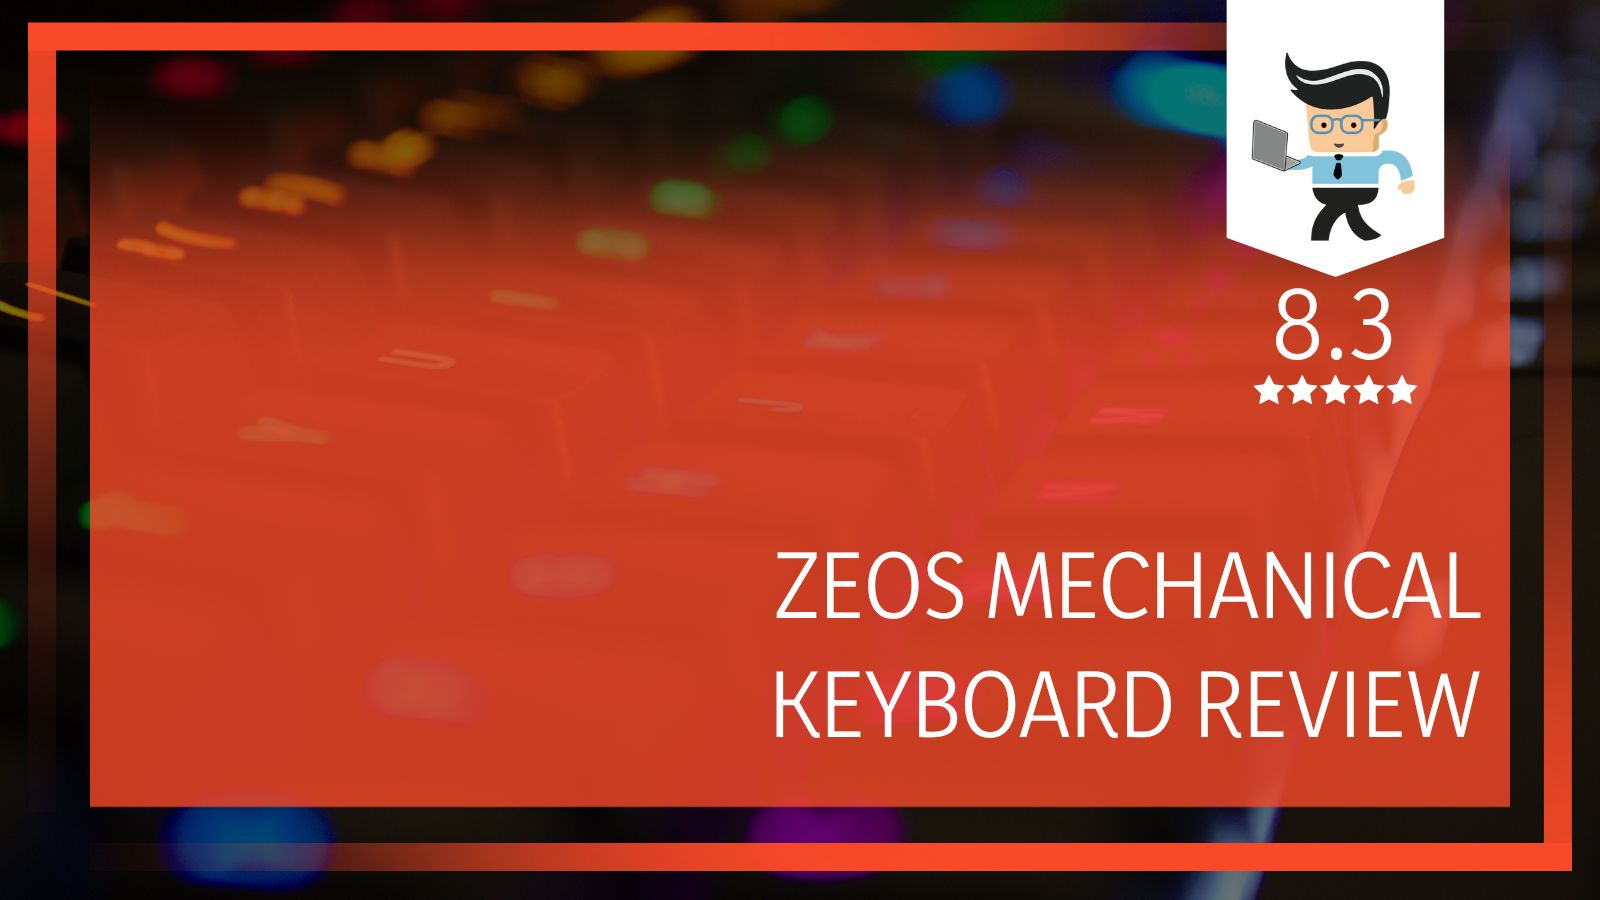 Zeos Mechanical Keyboard Review